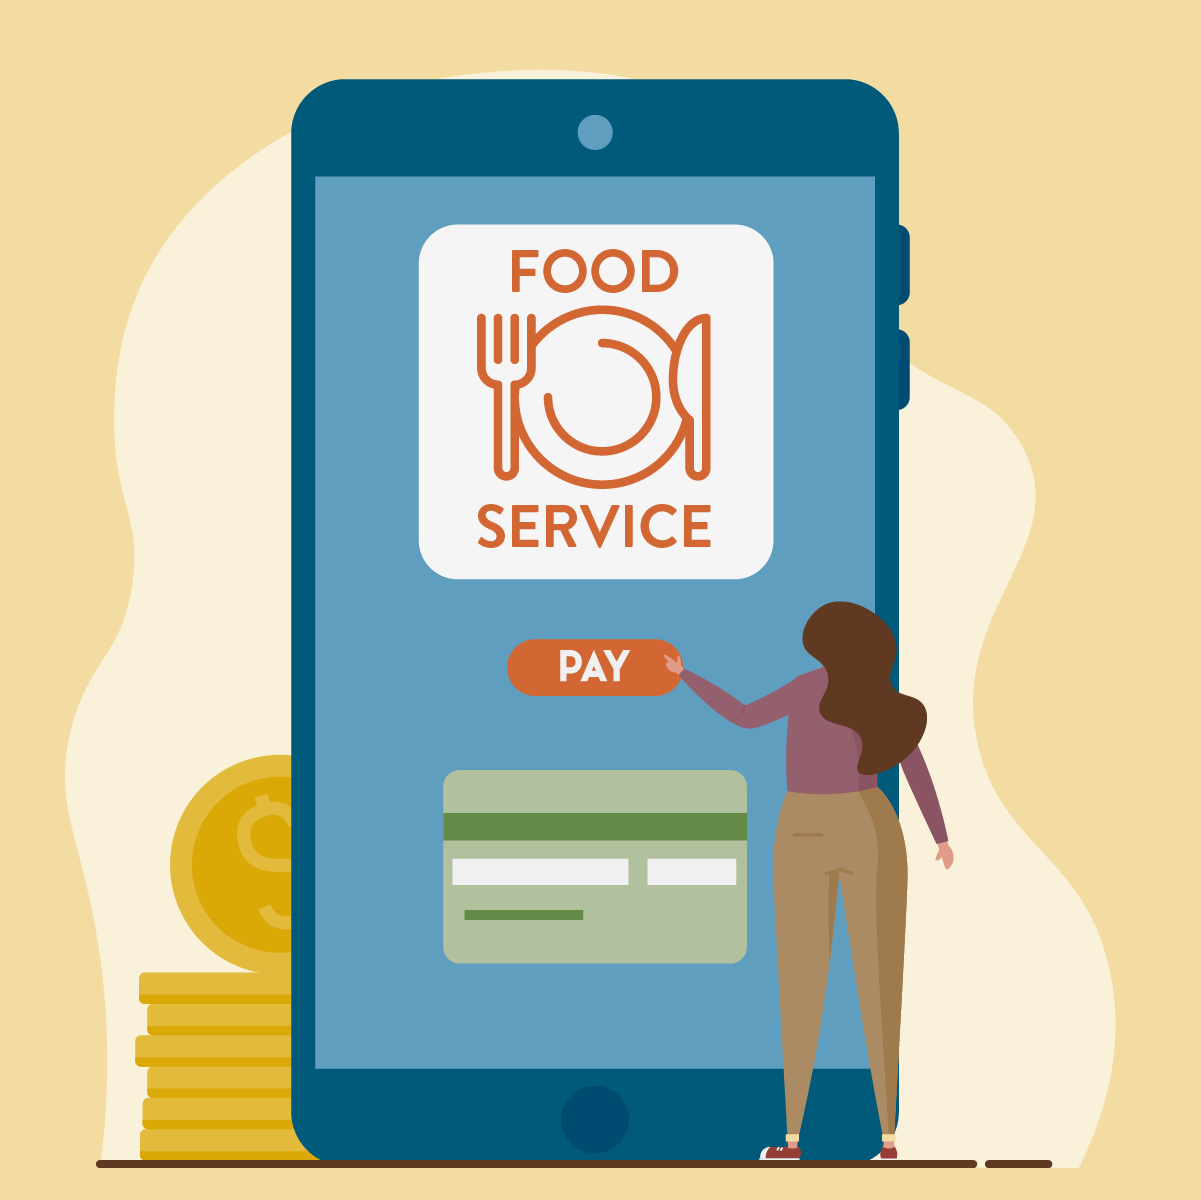 Food Service logo on cell phone with person pushing pay button and image of credit card